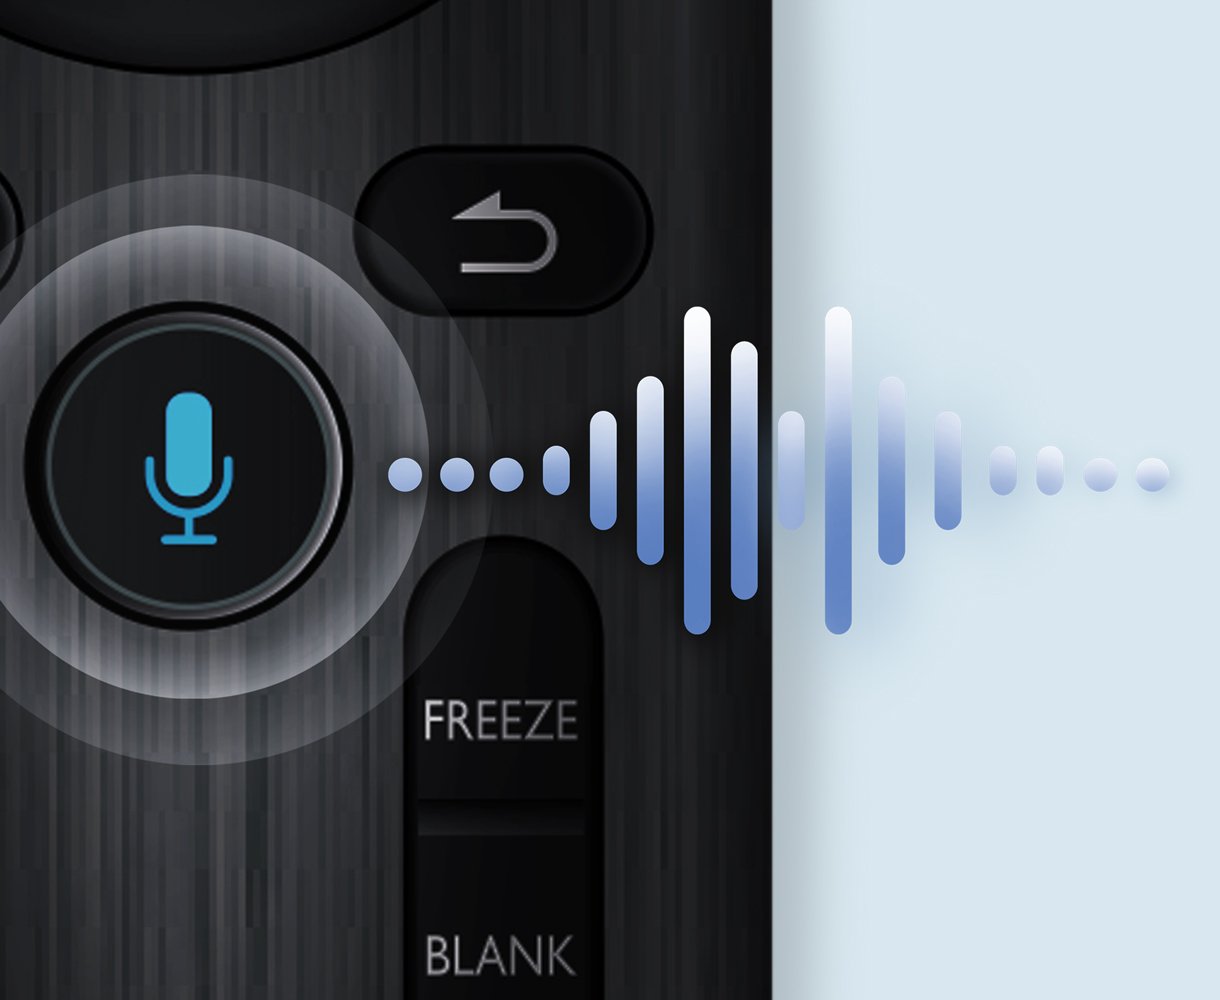 Sound being captured by the voice assistant on the RP03 interactive display remote control